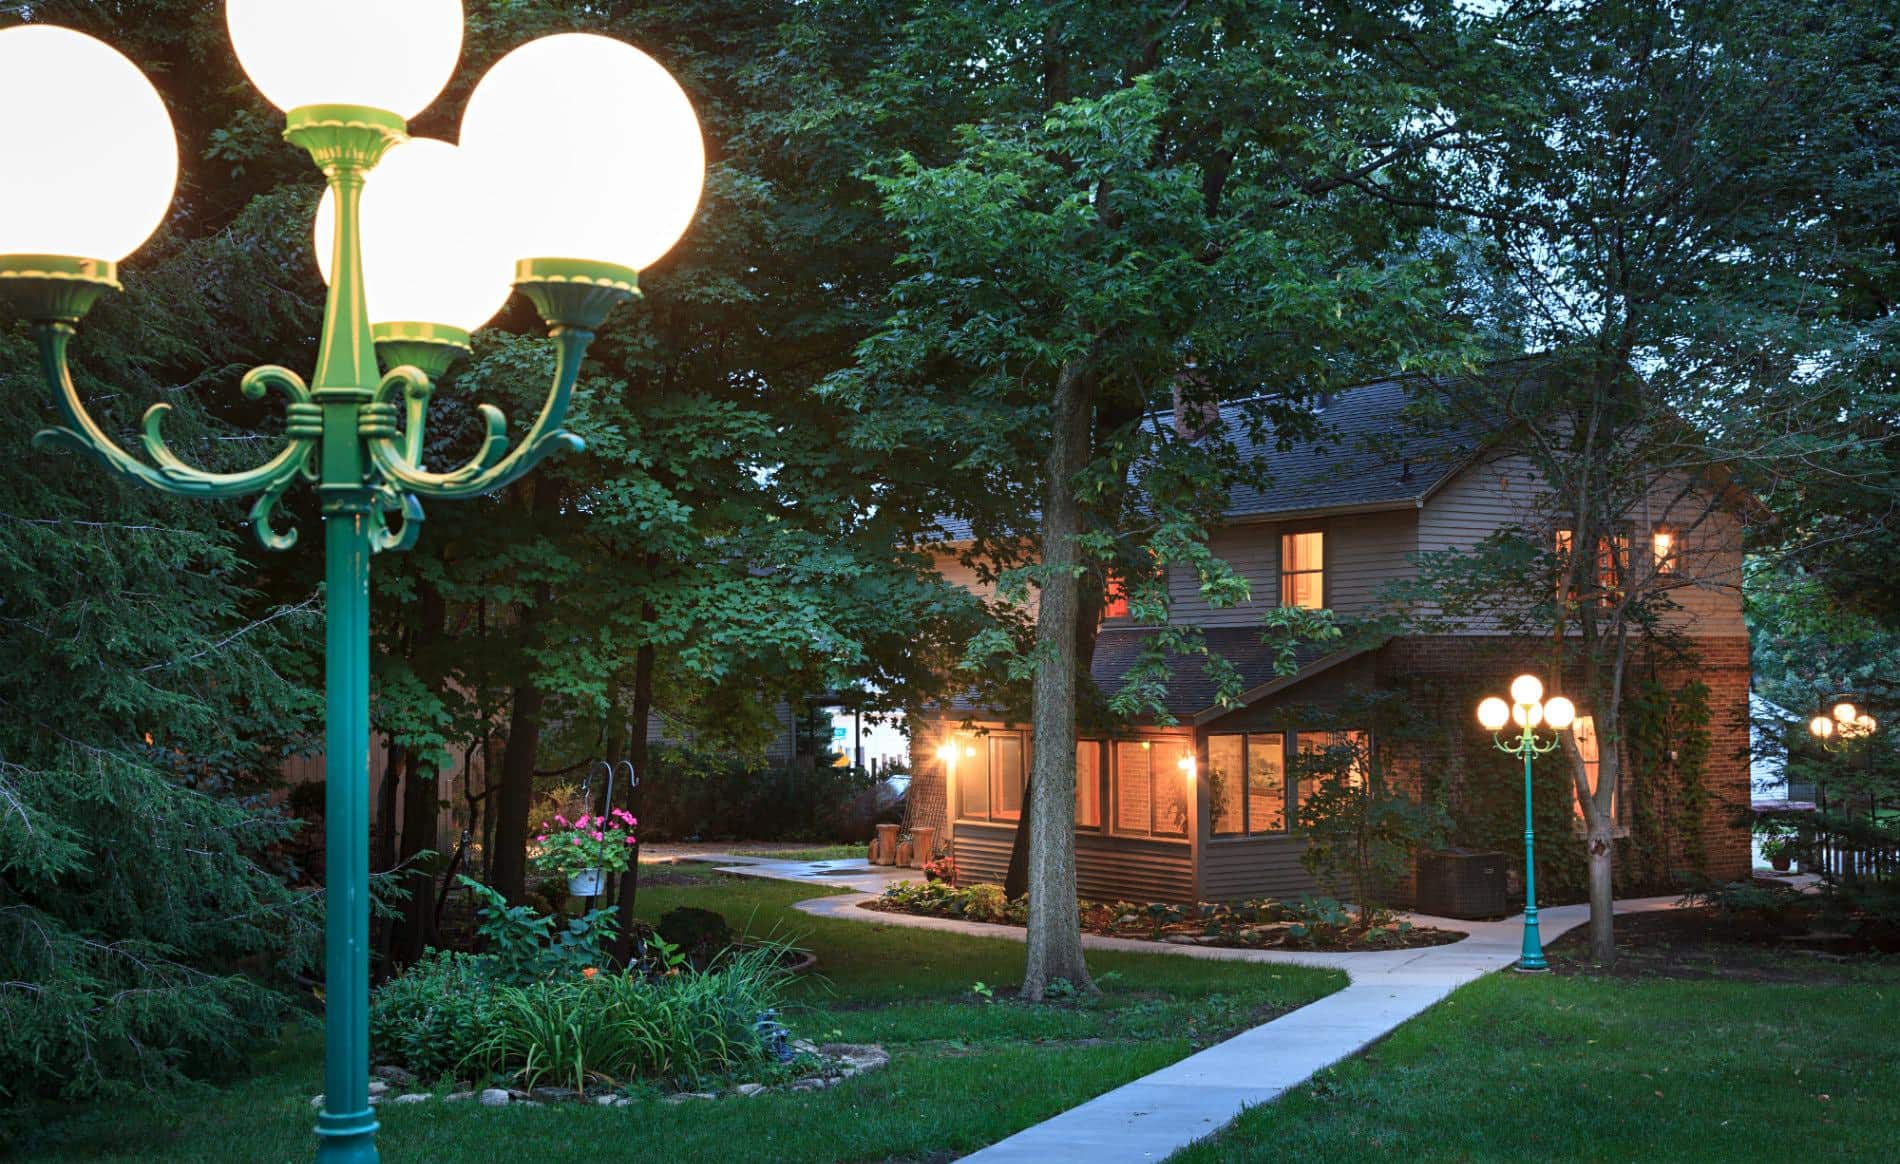 Exterior view of backyard at dusk with a sidewalk, green grass, a green light post and several trees